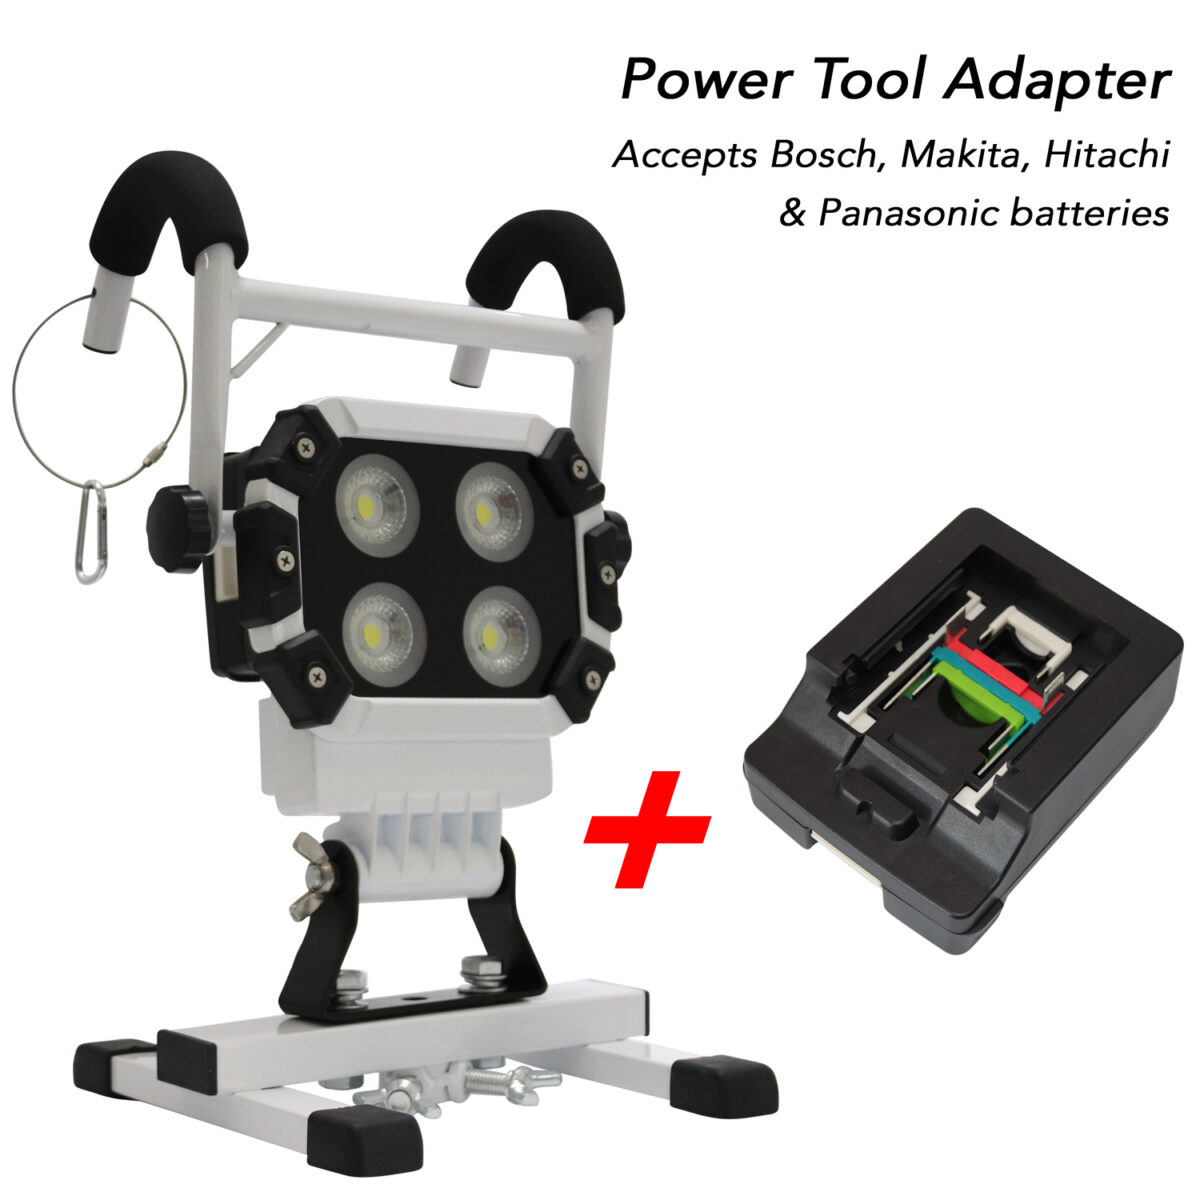 Tuff-T4000 Rechargeable with 4 in 1 Power Tool Adapter